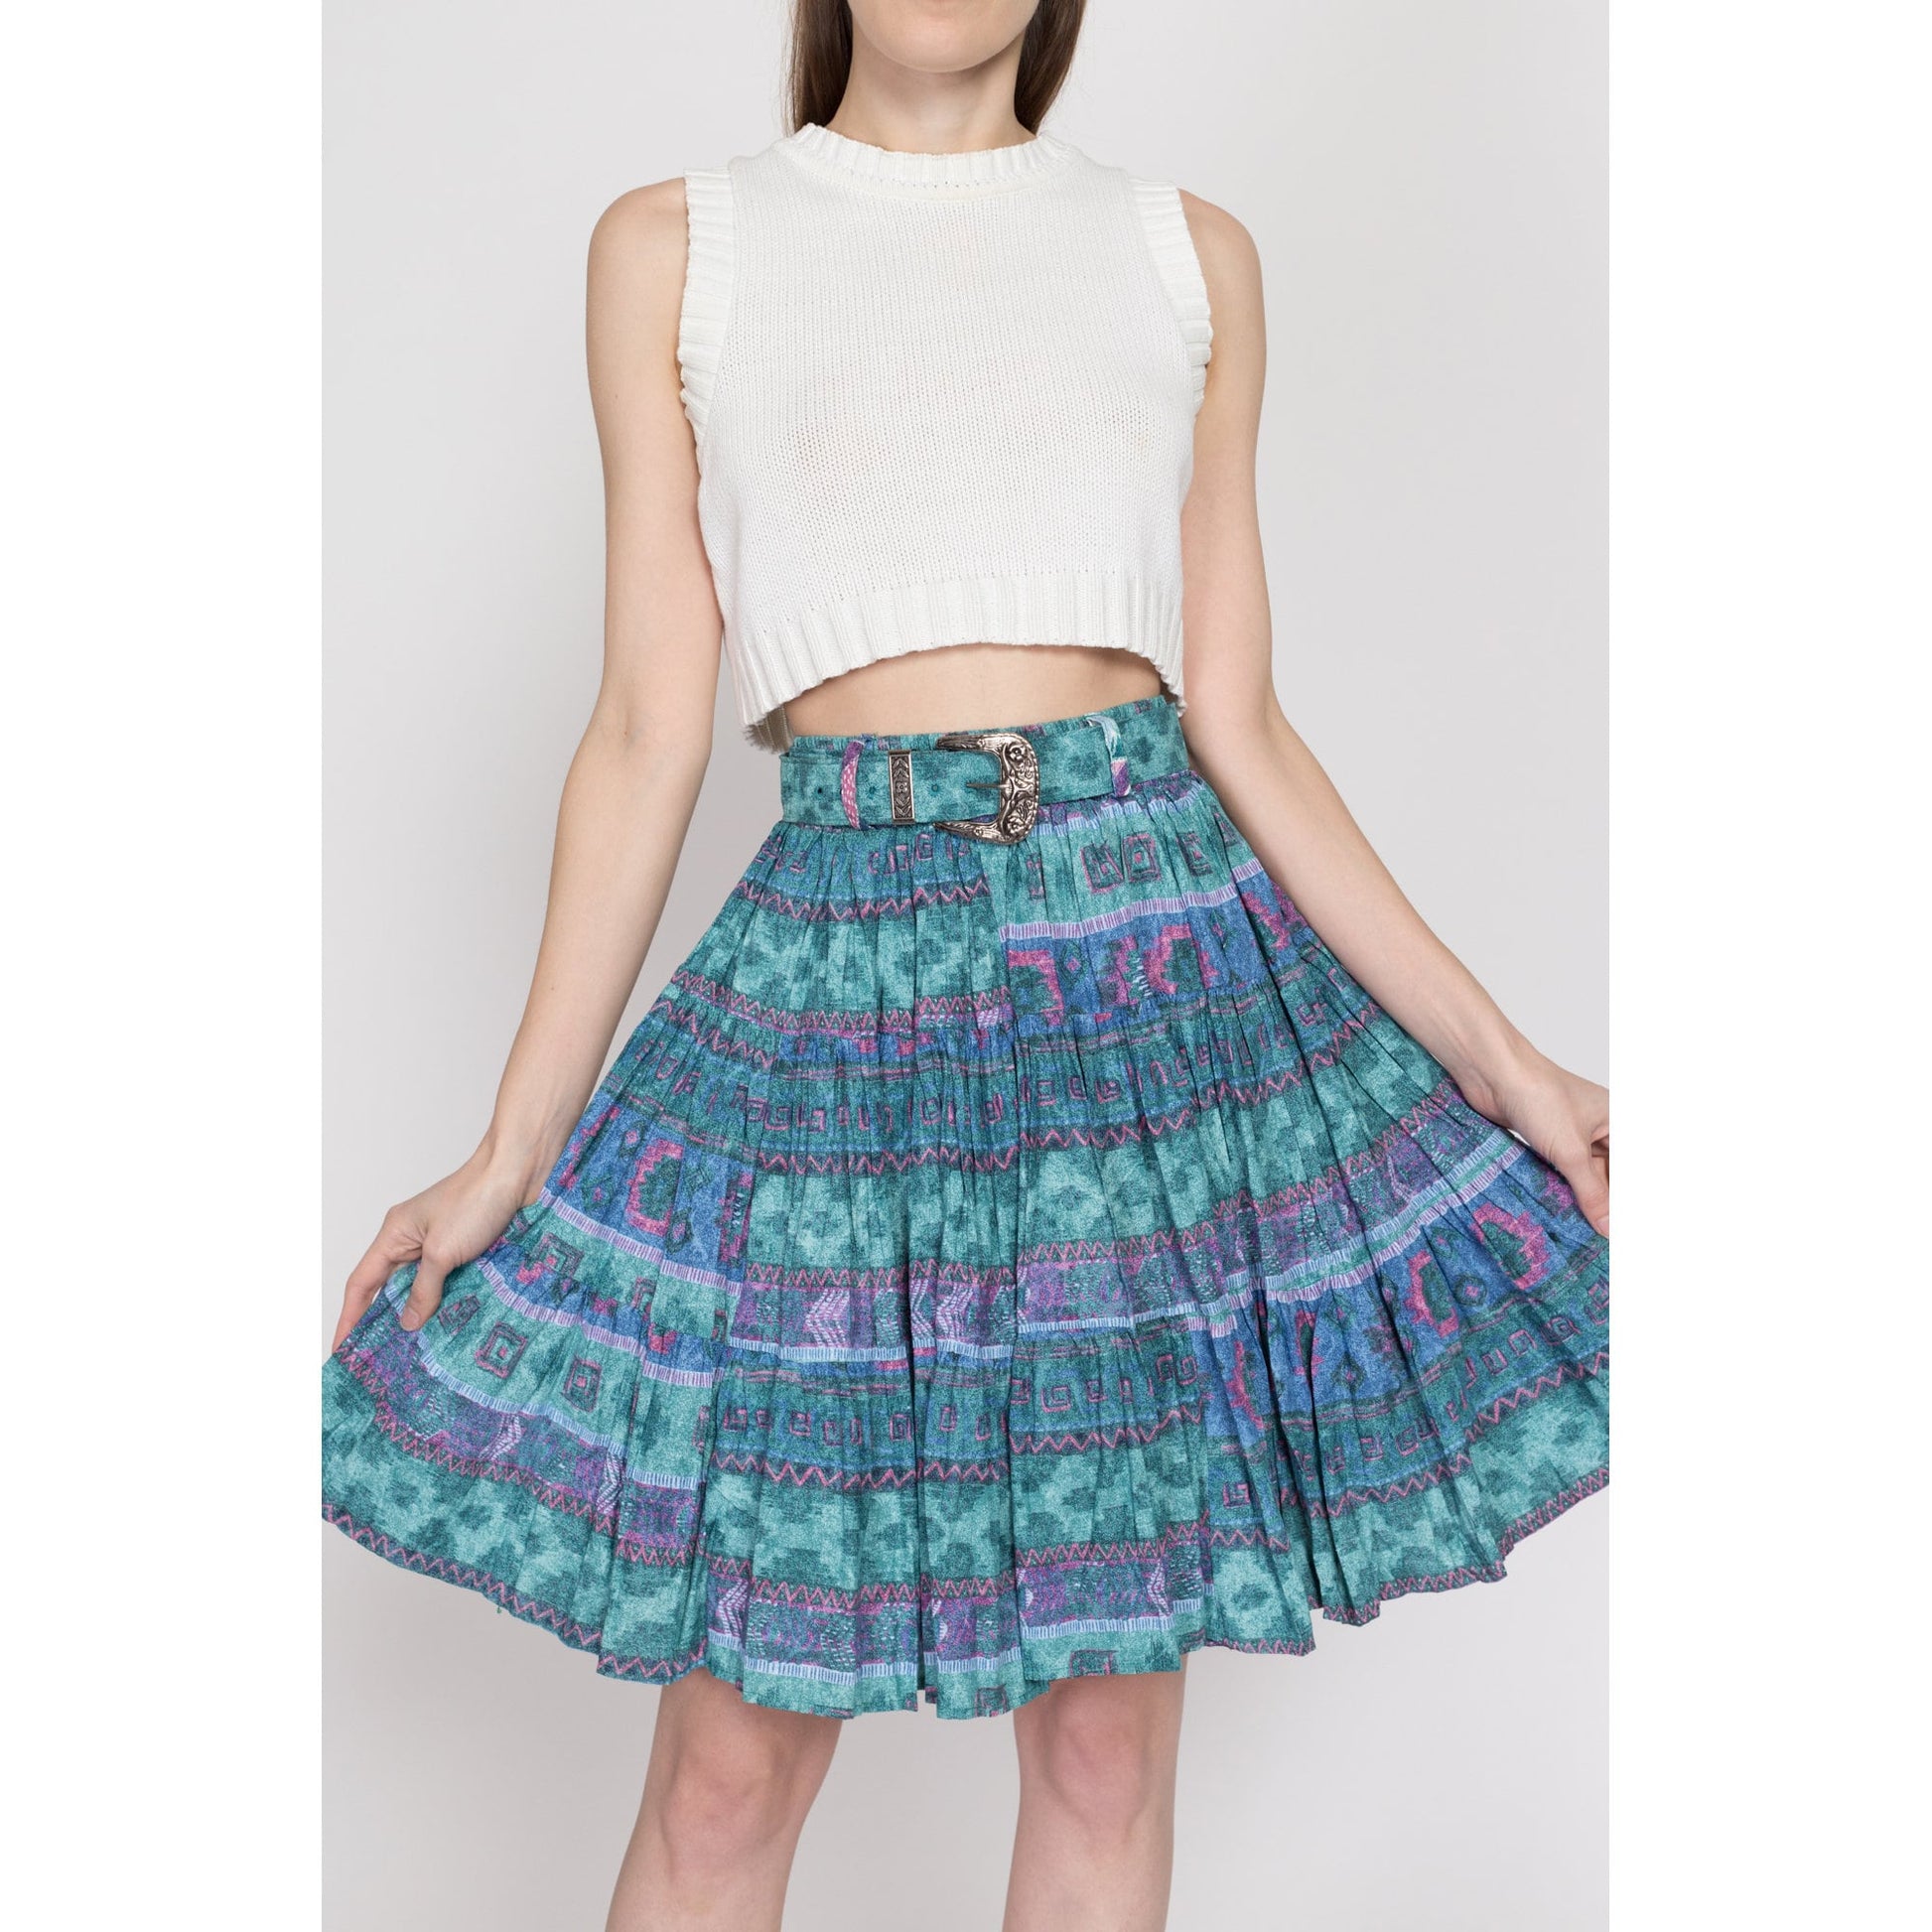 70s 80s Evan Picone Belted Skirt - Extra Small, 24.5 – Flying